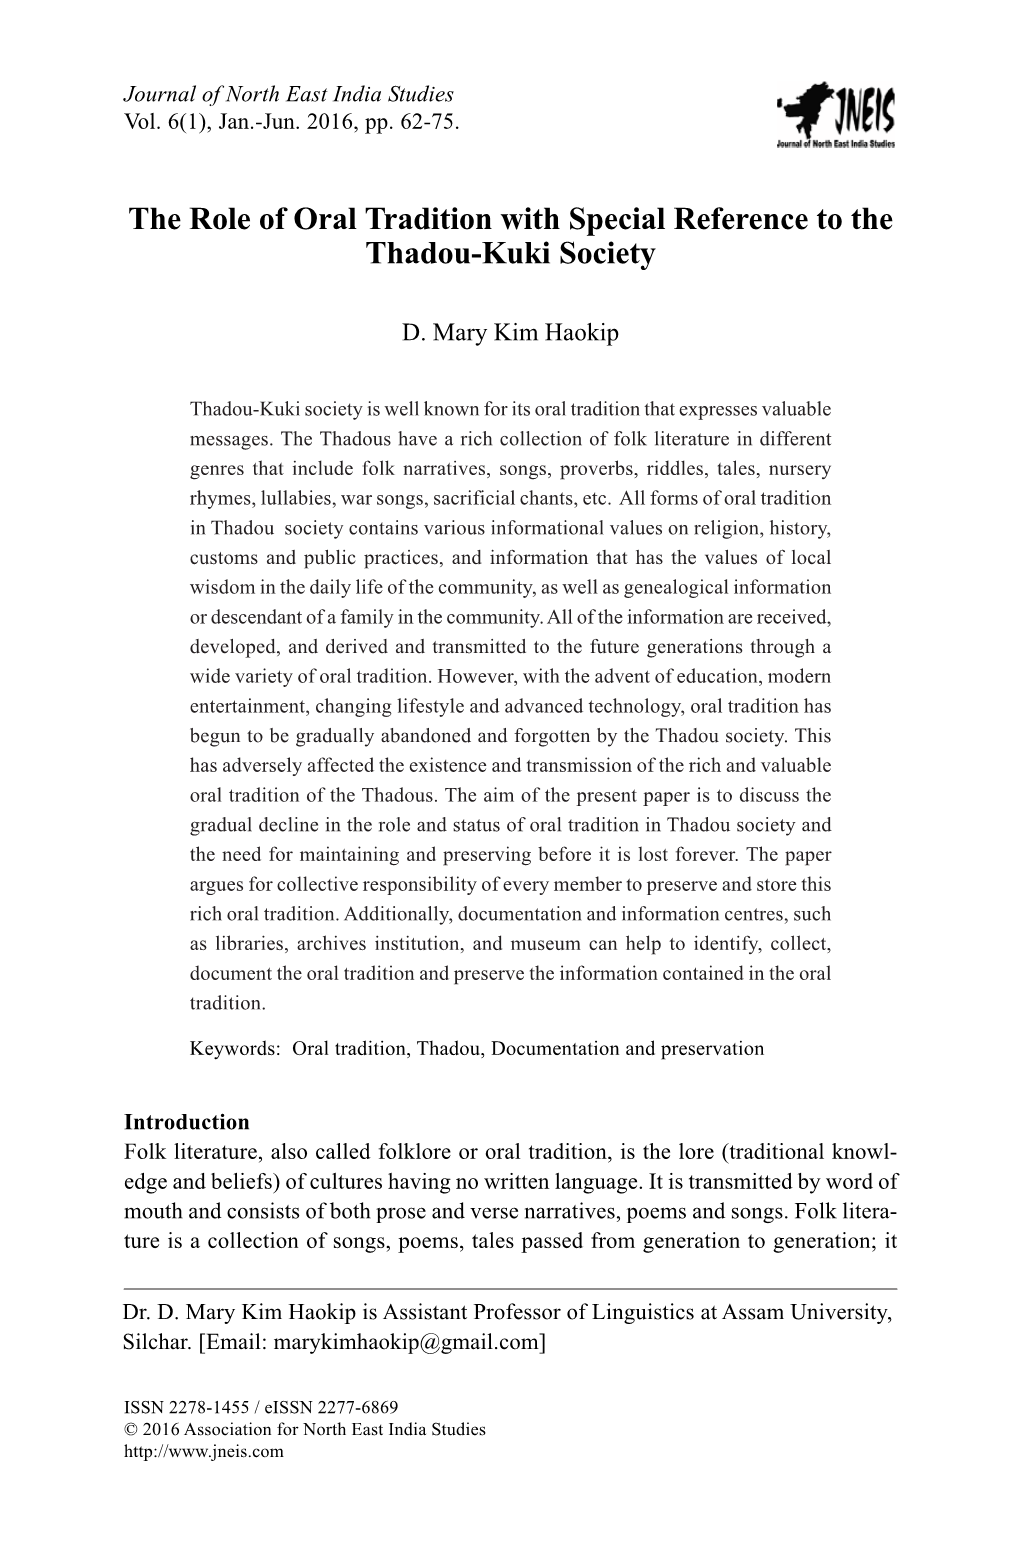 The Role of Oral Tradition with Special Reference to the Thadou-Kuki Society